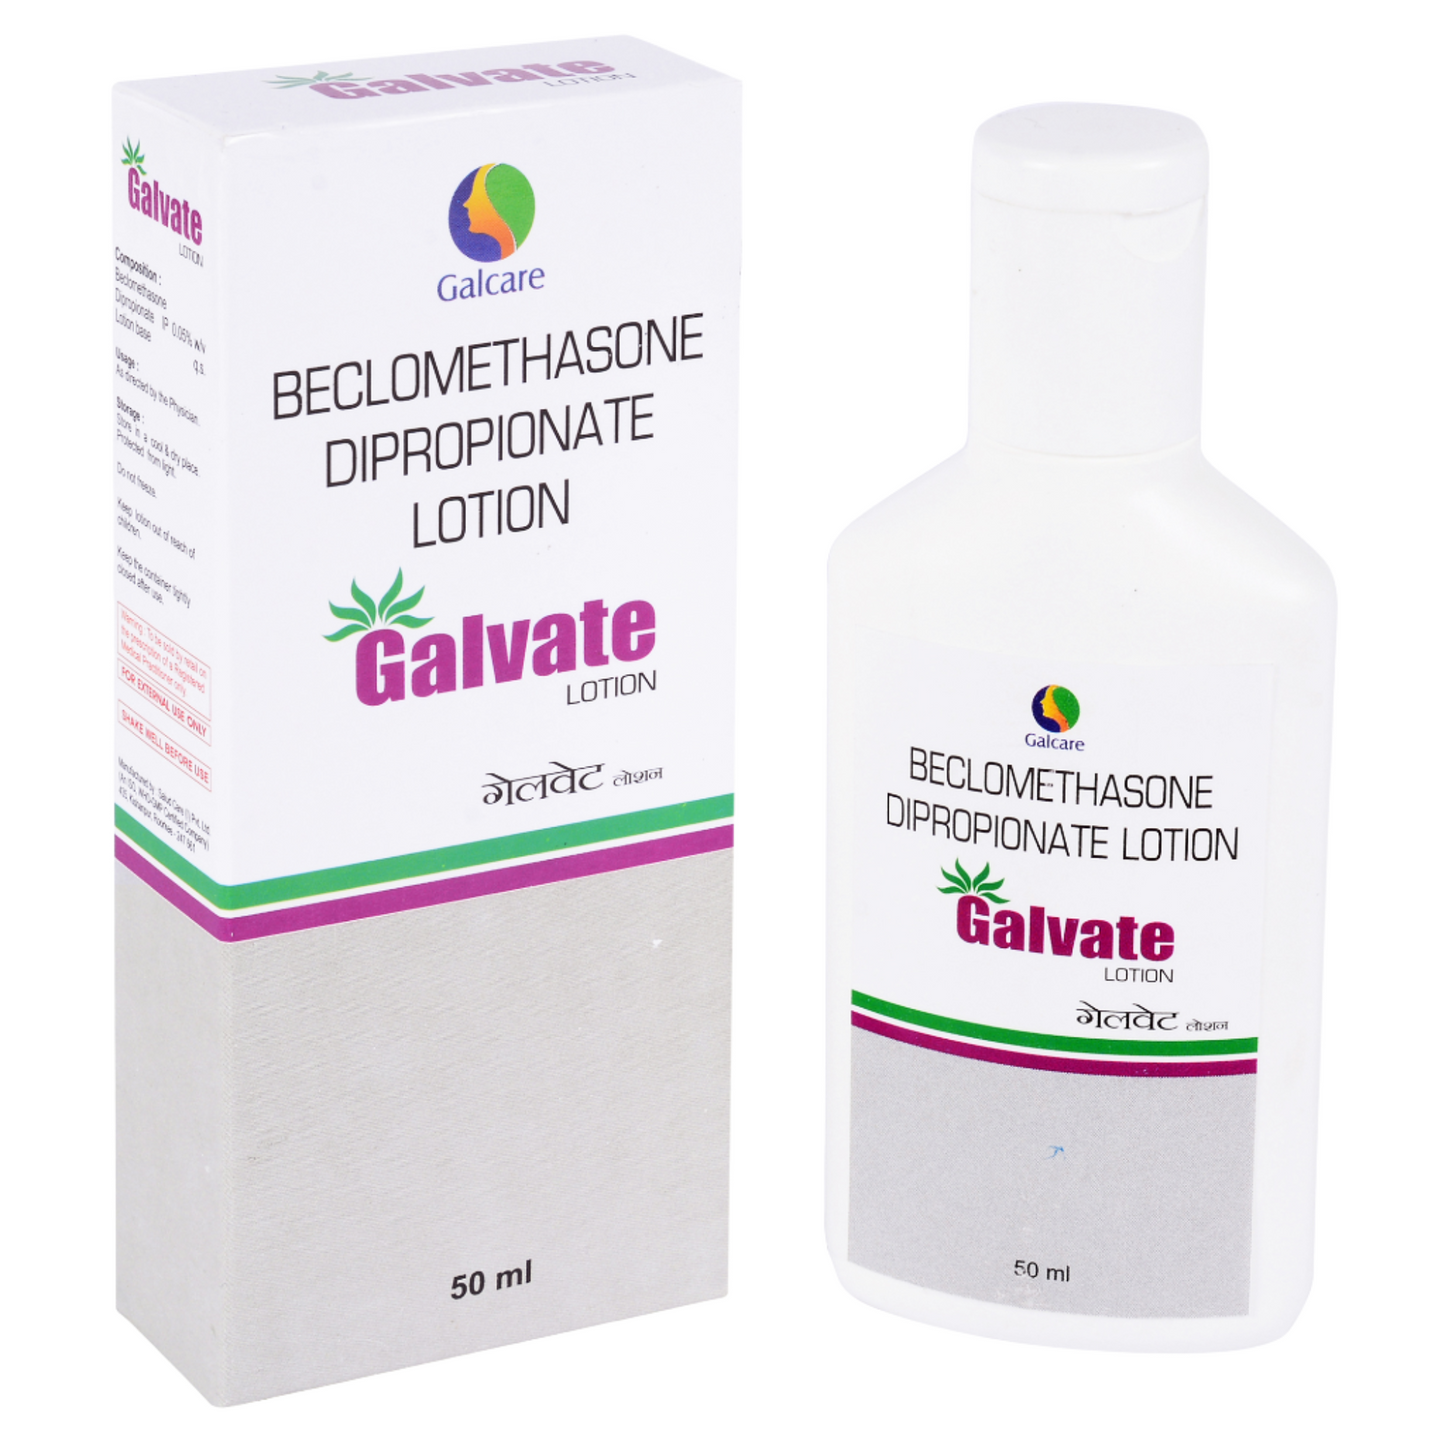 Galvate Lotion